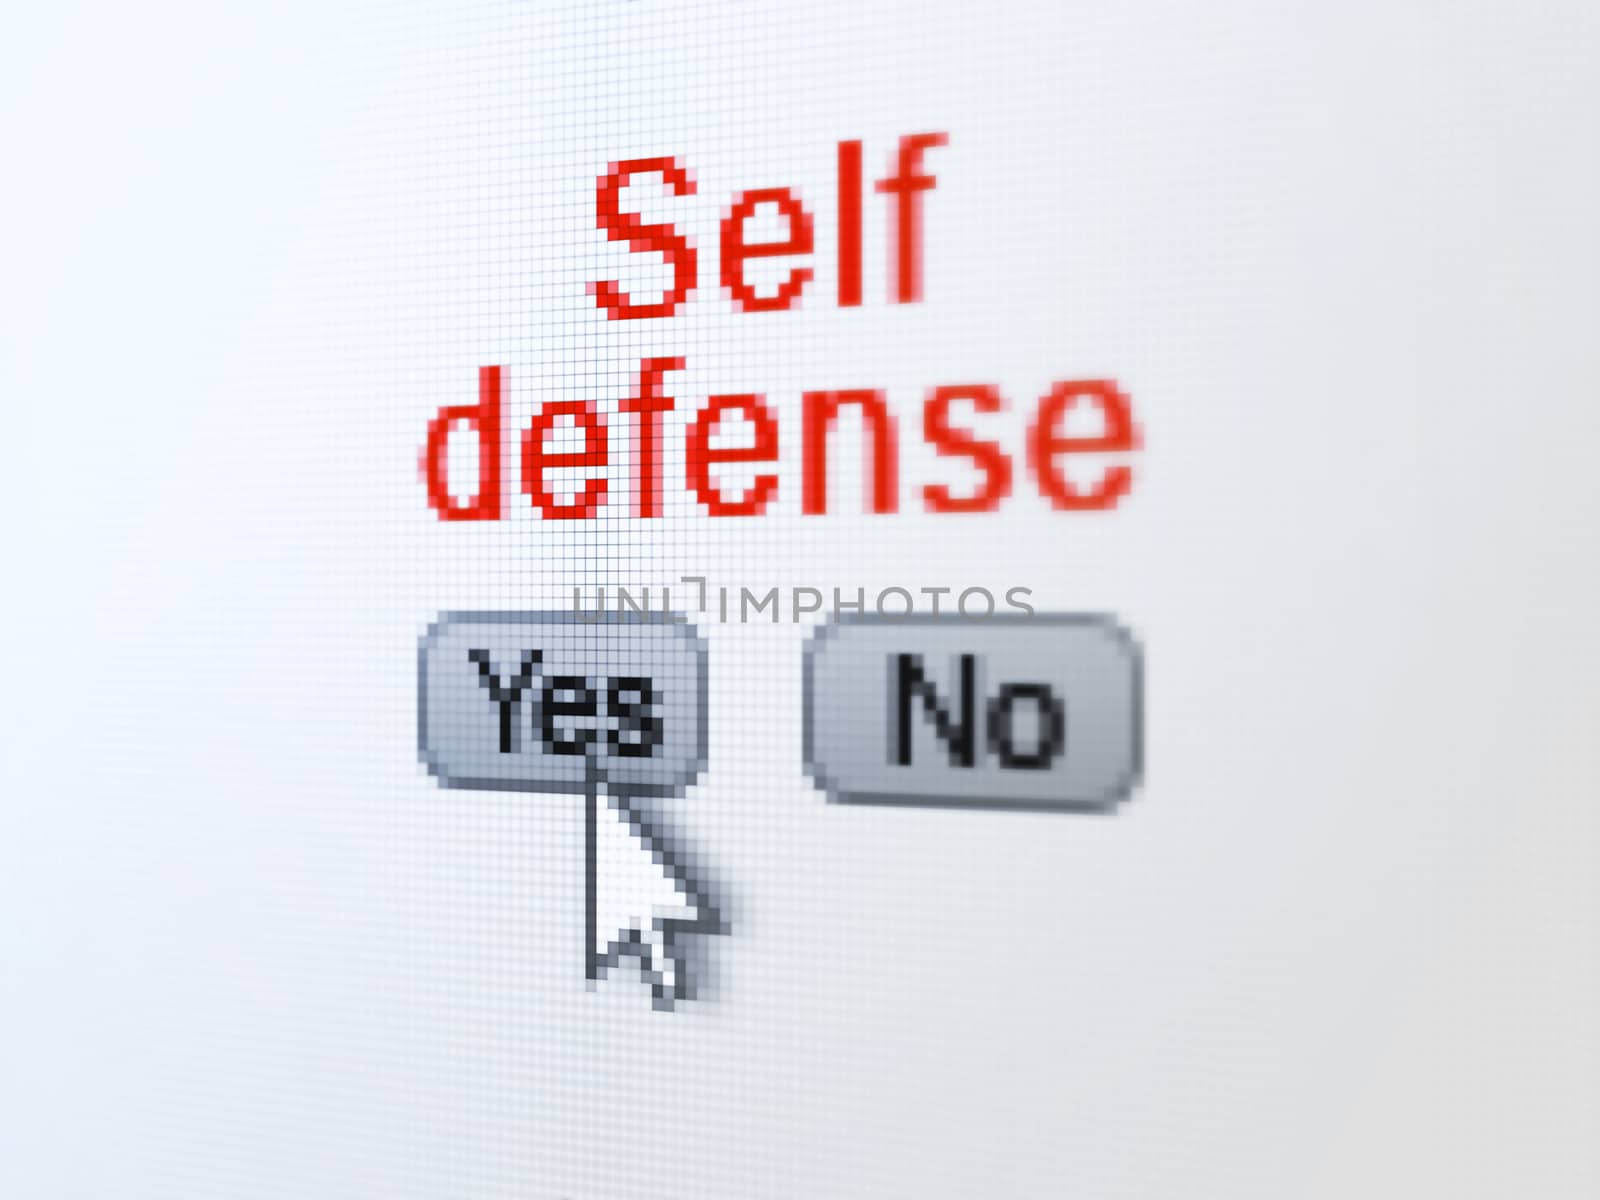 Safety concept: Self Defense on digital computer screen by maxkabakov